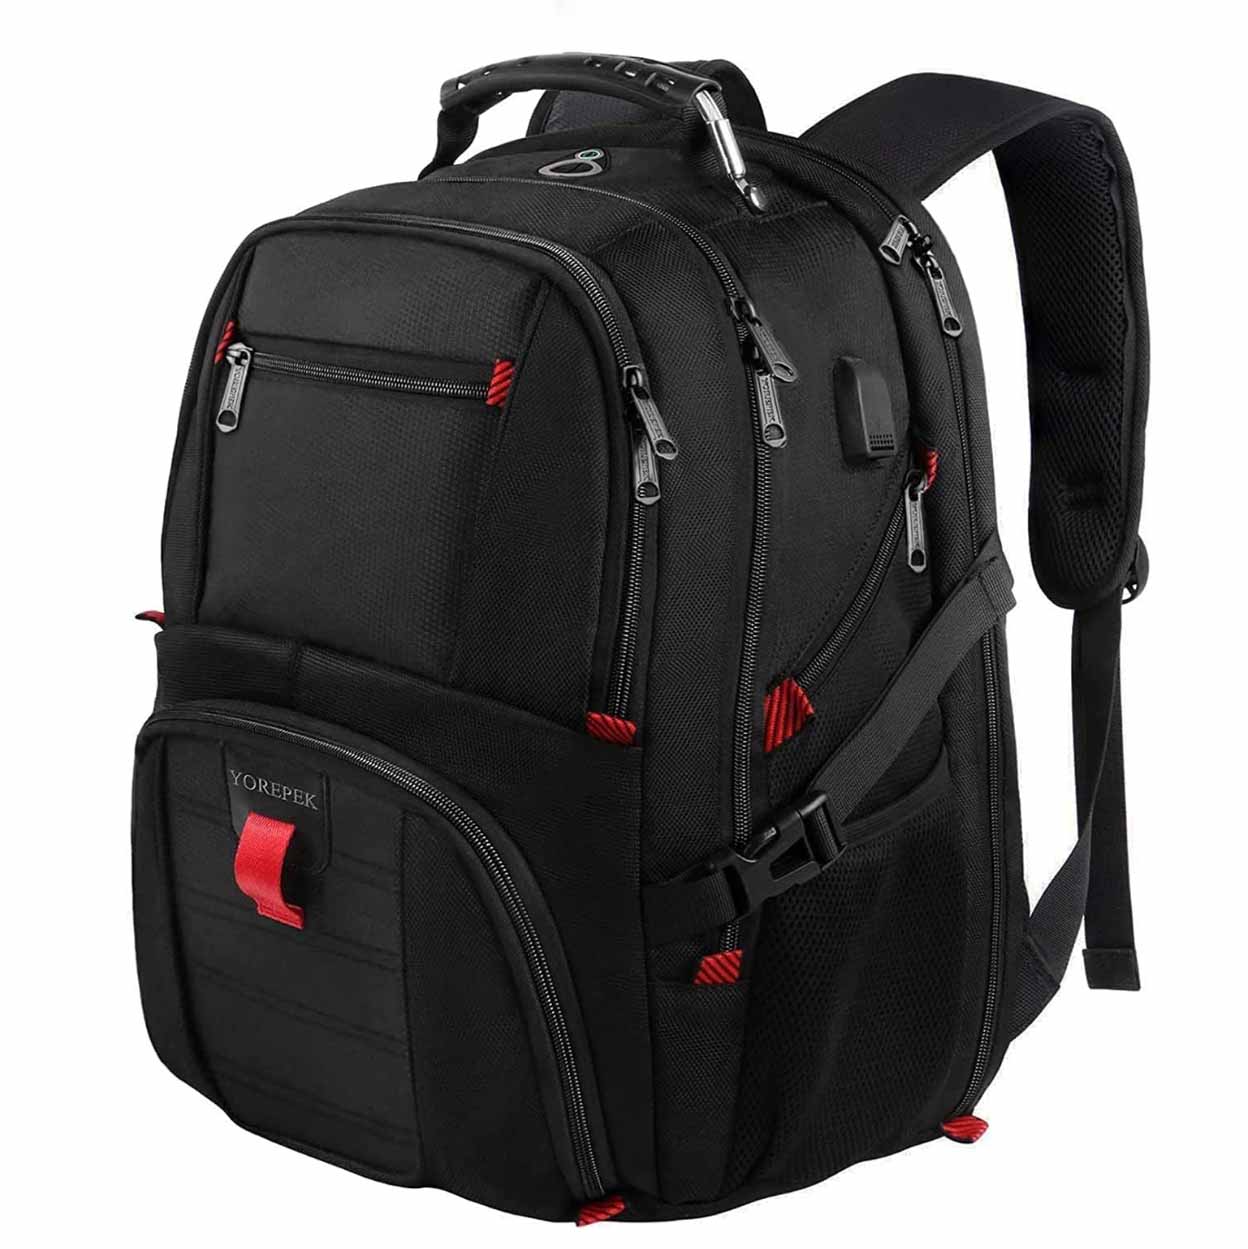 Black backpack with red tags